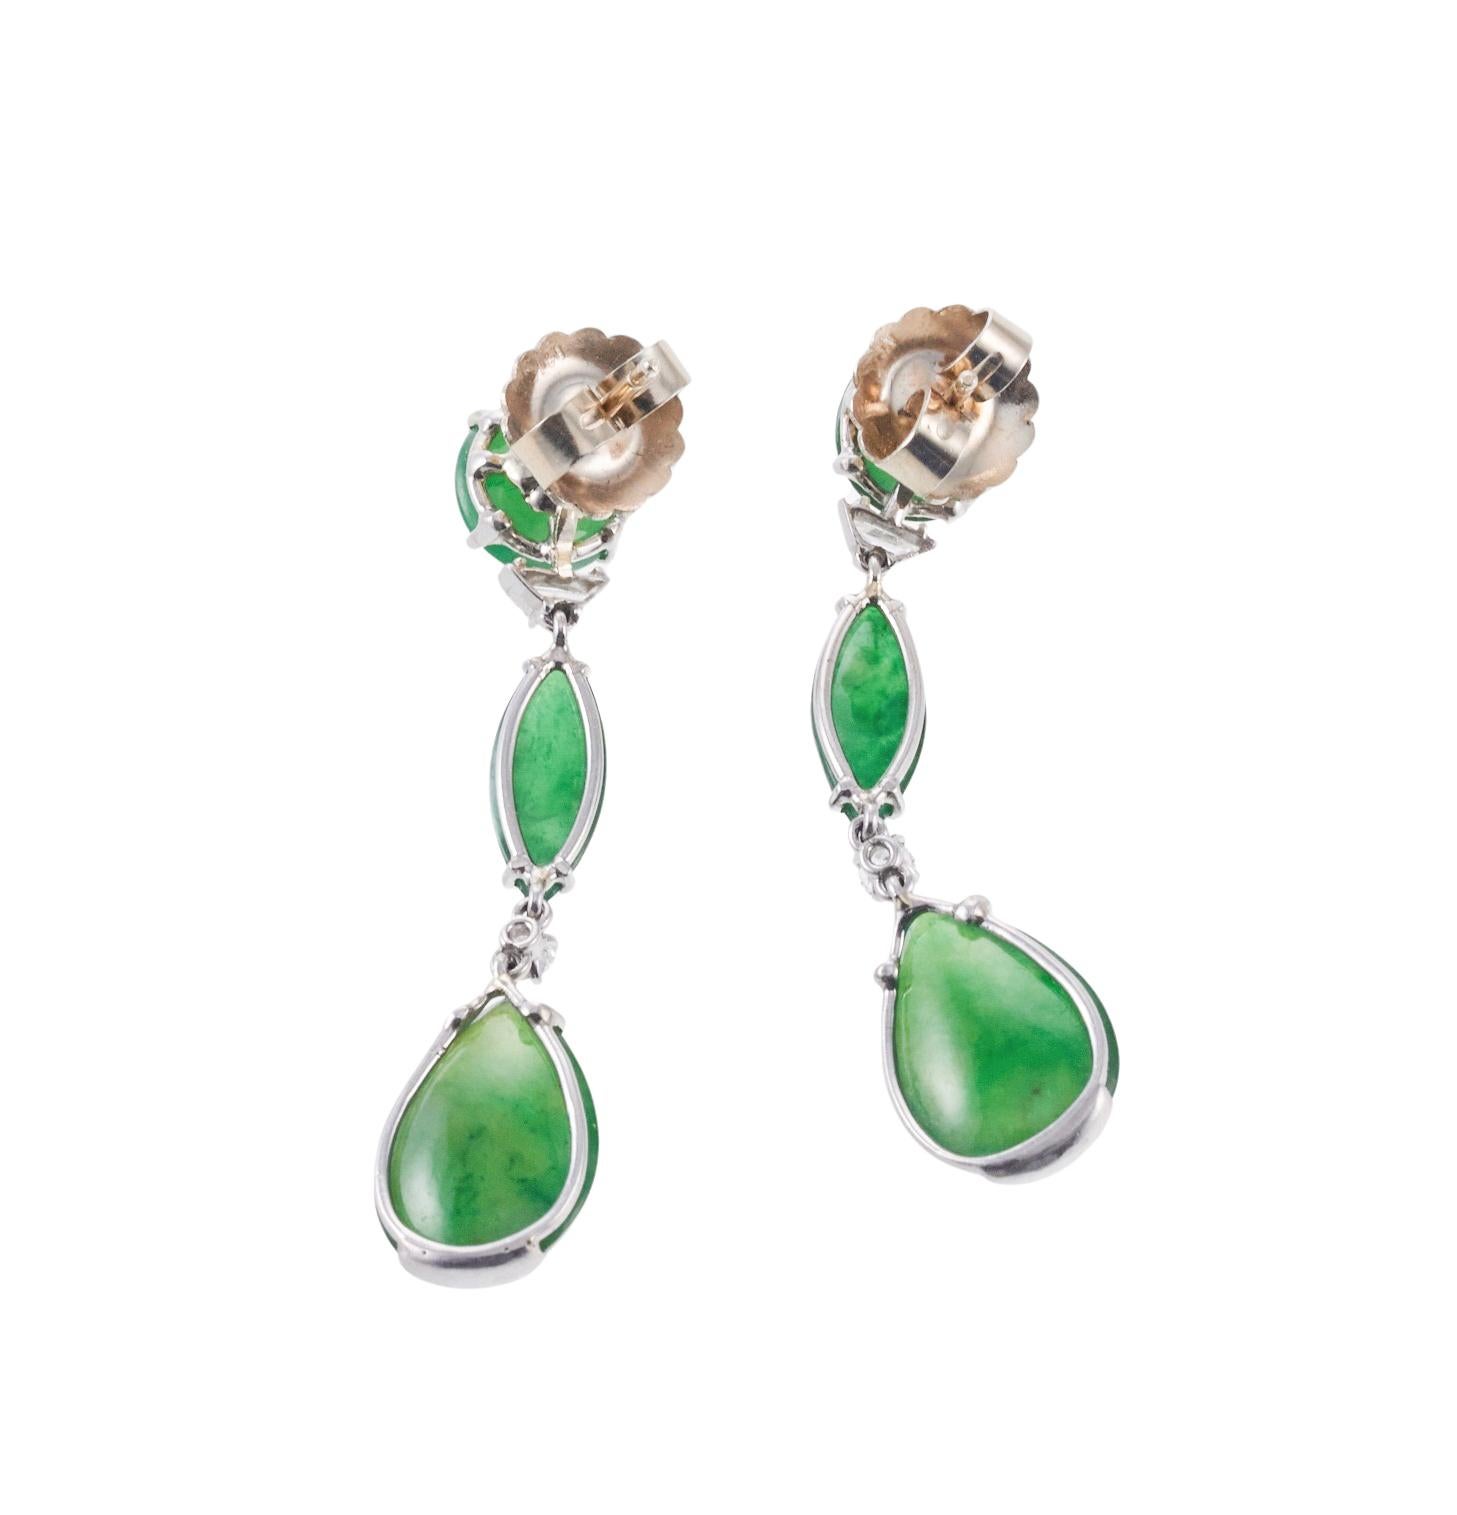 Certified 22.80 Carat Natural Jadeite Jade Diamond Gold 1970s Drop Earrings In Excellent Condition For Sale In New York, NY